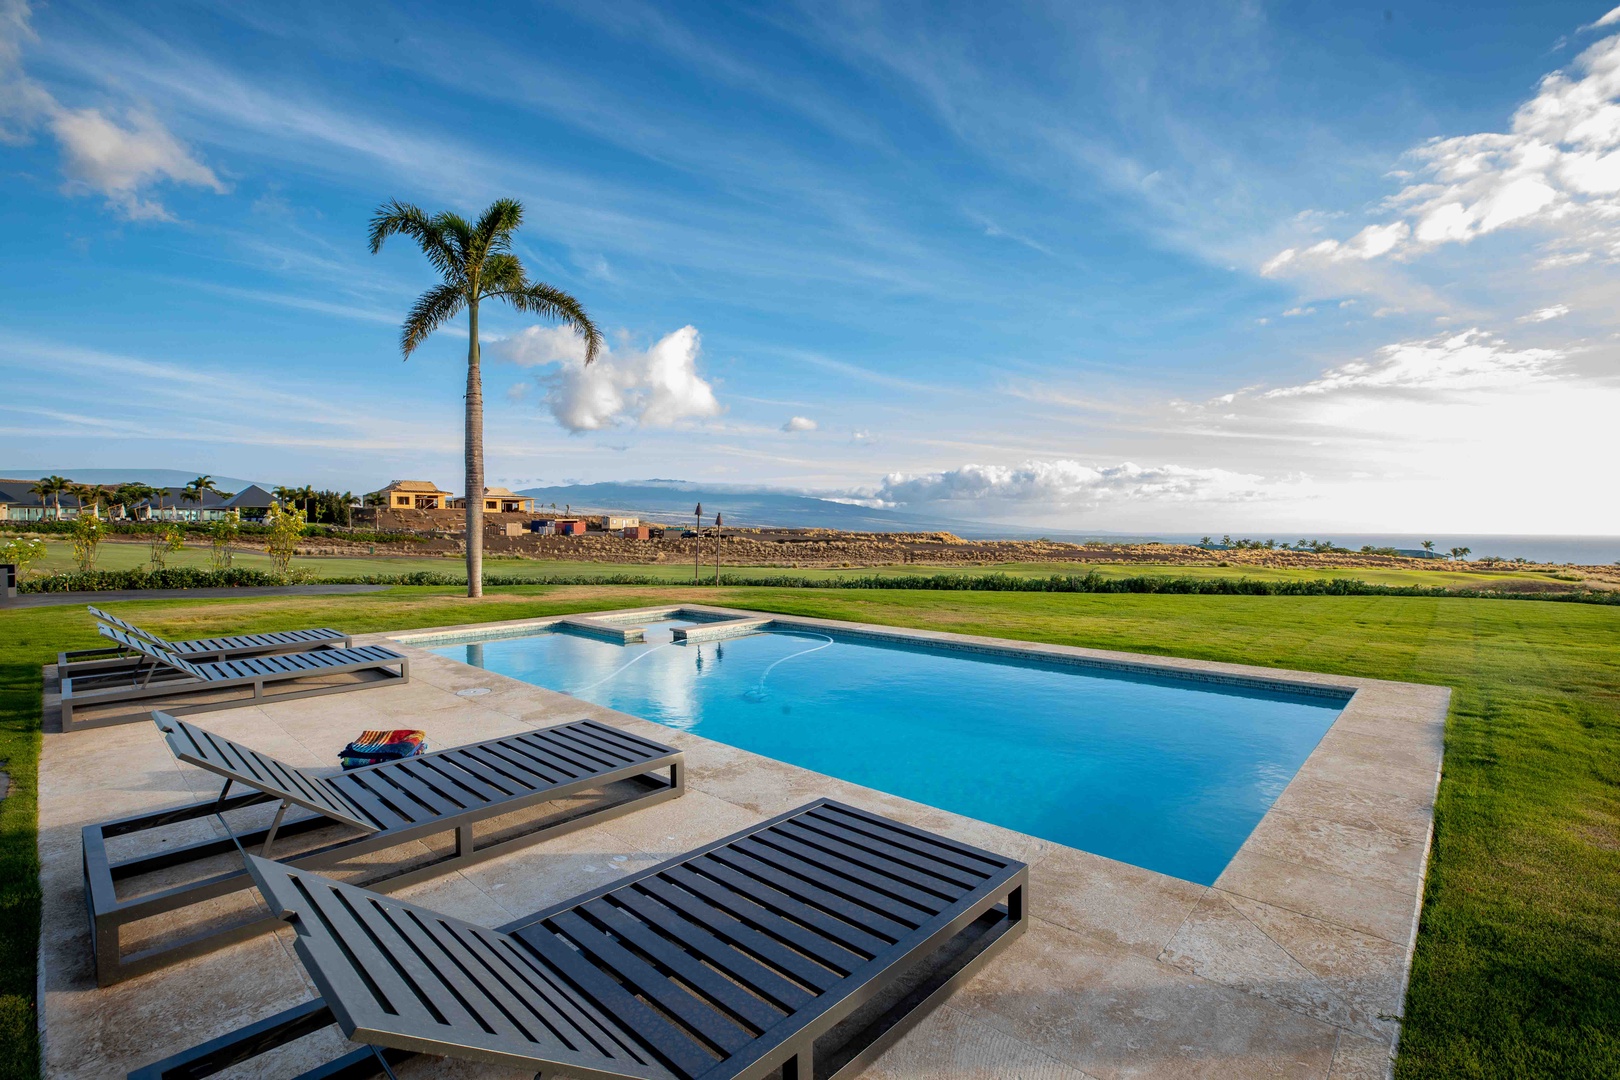 Kamuela Vacation Rentals, Hapuna Estates #8 - Take a dip in the pool or relax in the spa after a day of adventure